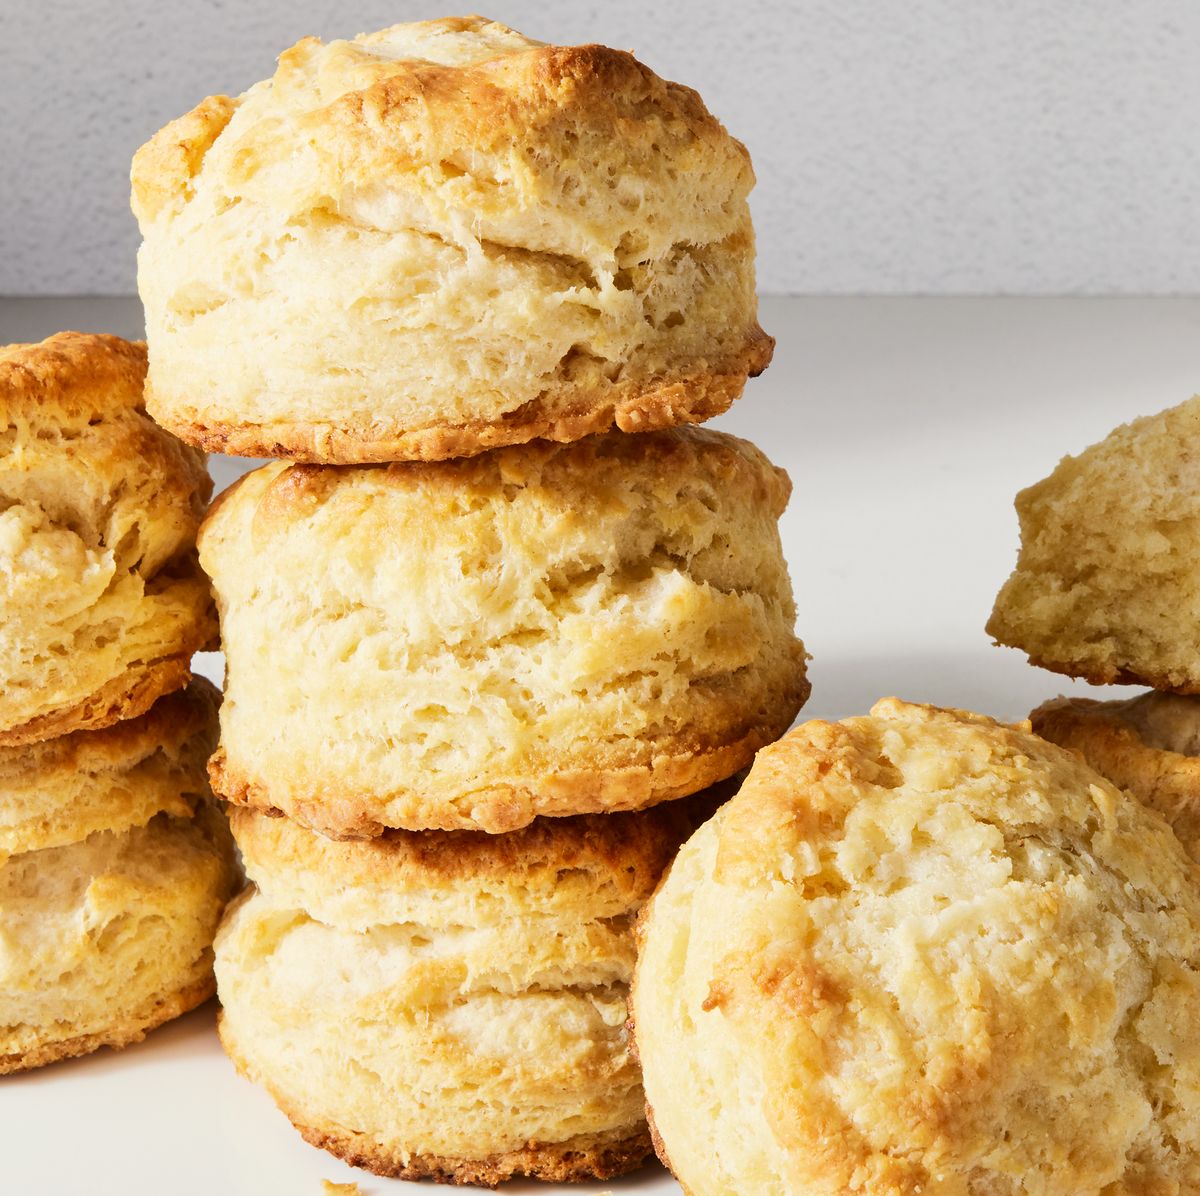 Best Homemade Biscuits Recipe - How To Make Homemade Biscuits